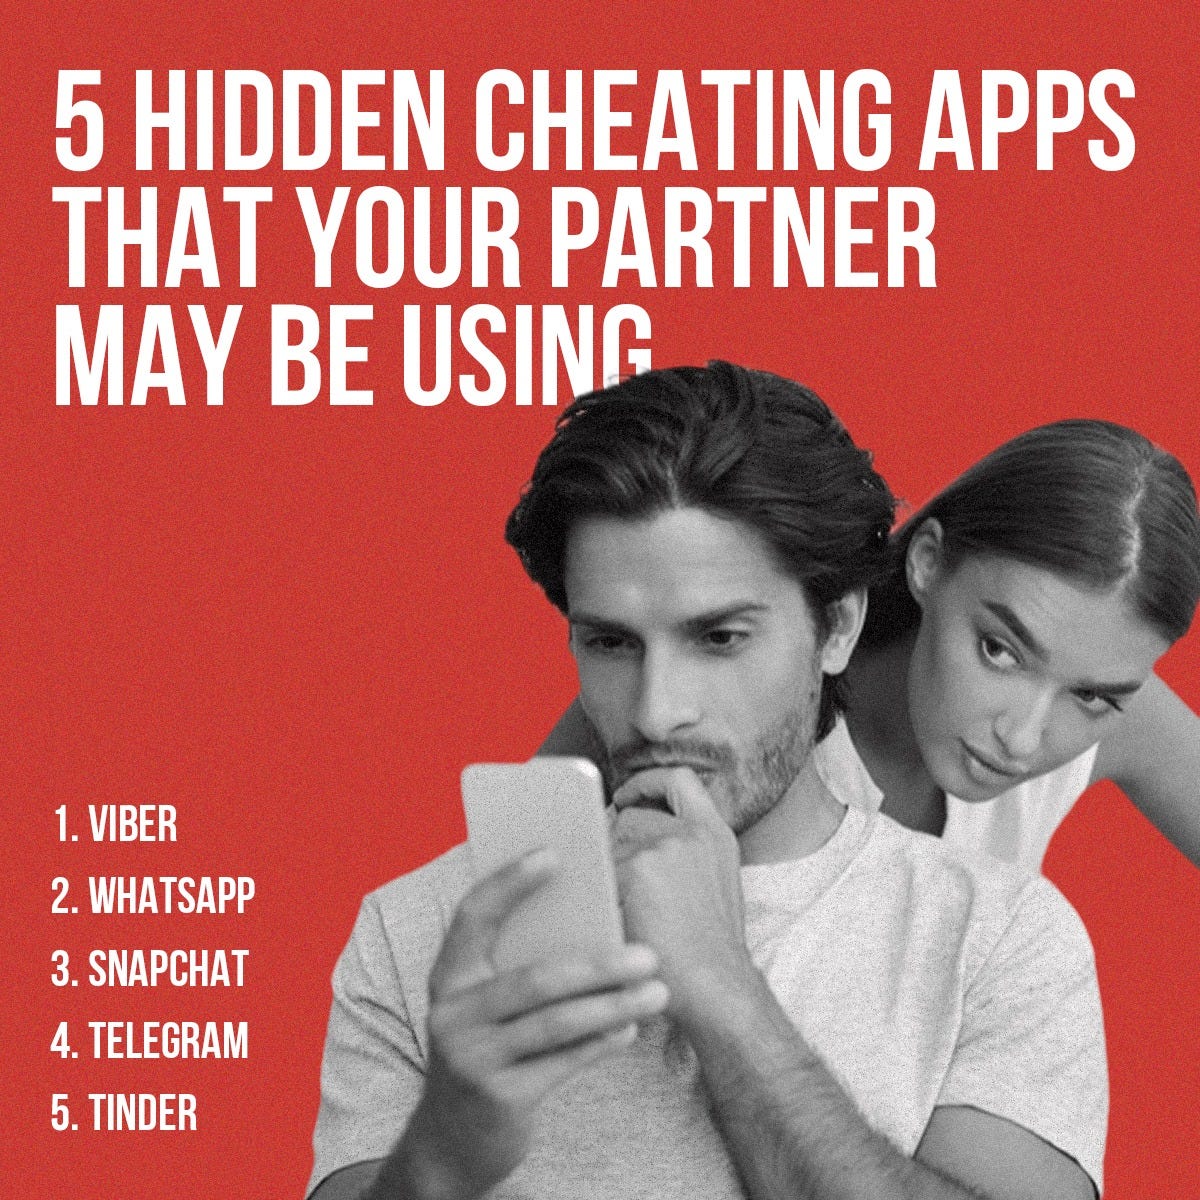 ifindcheaters.com